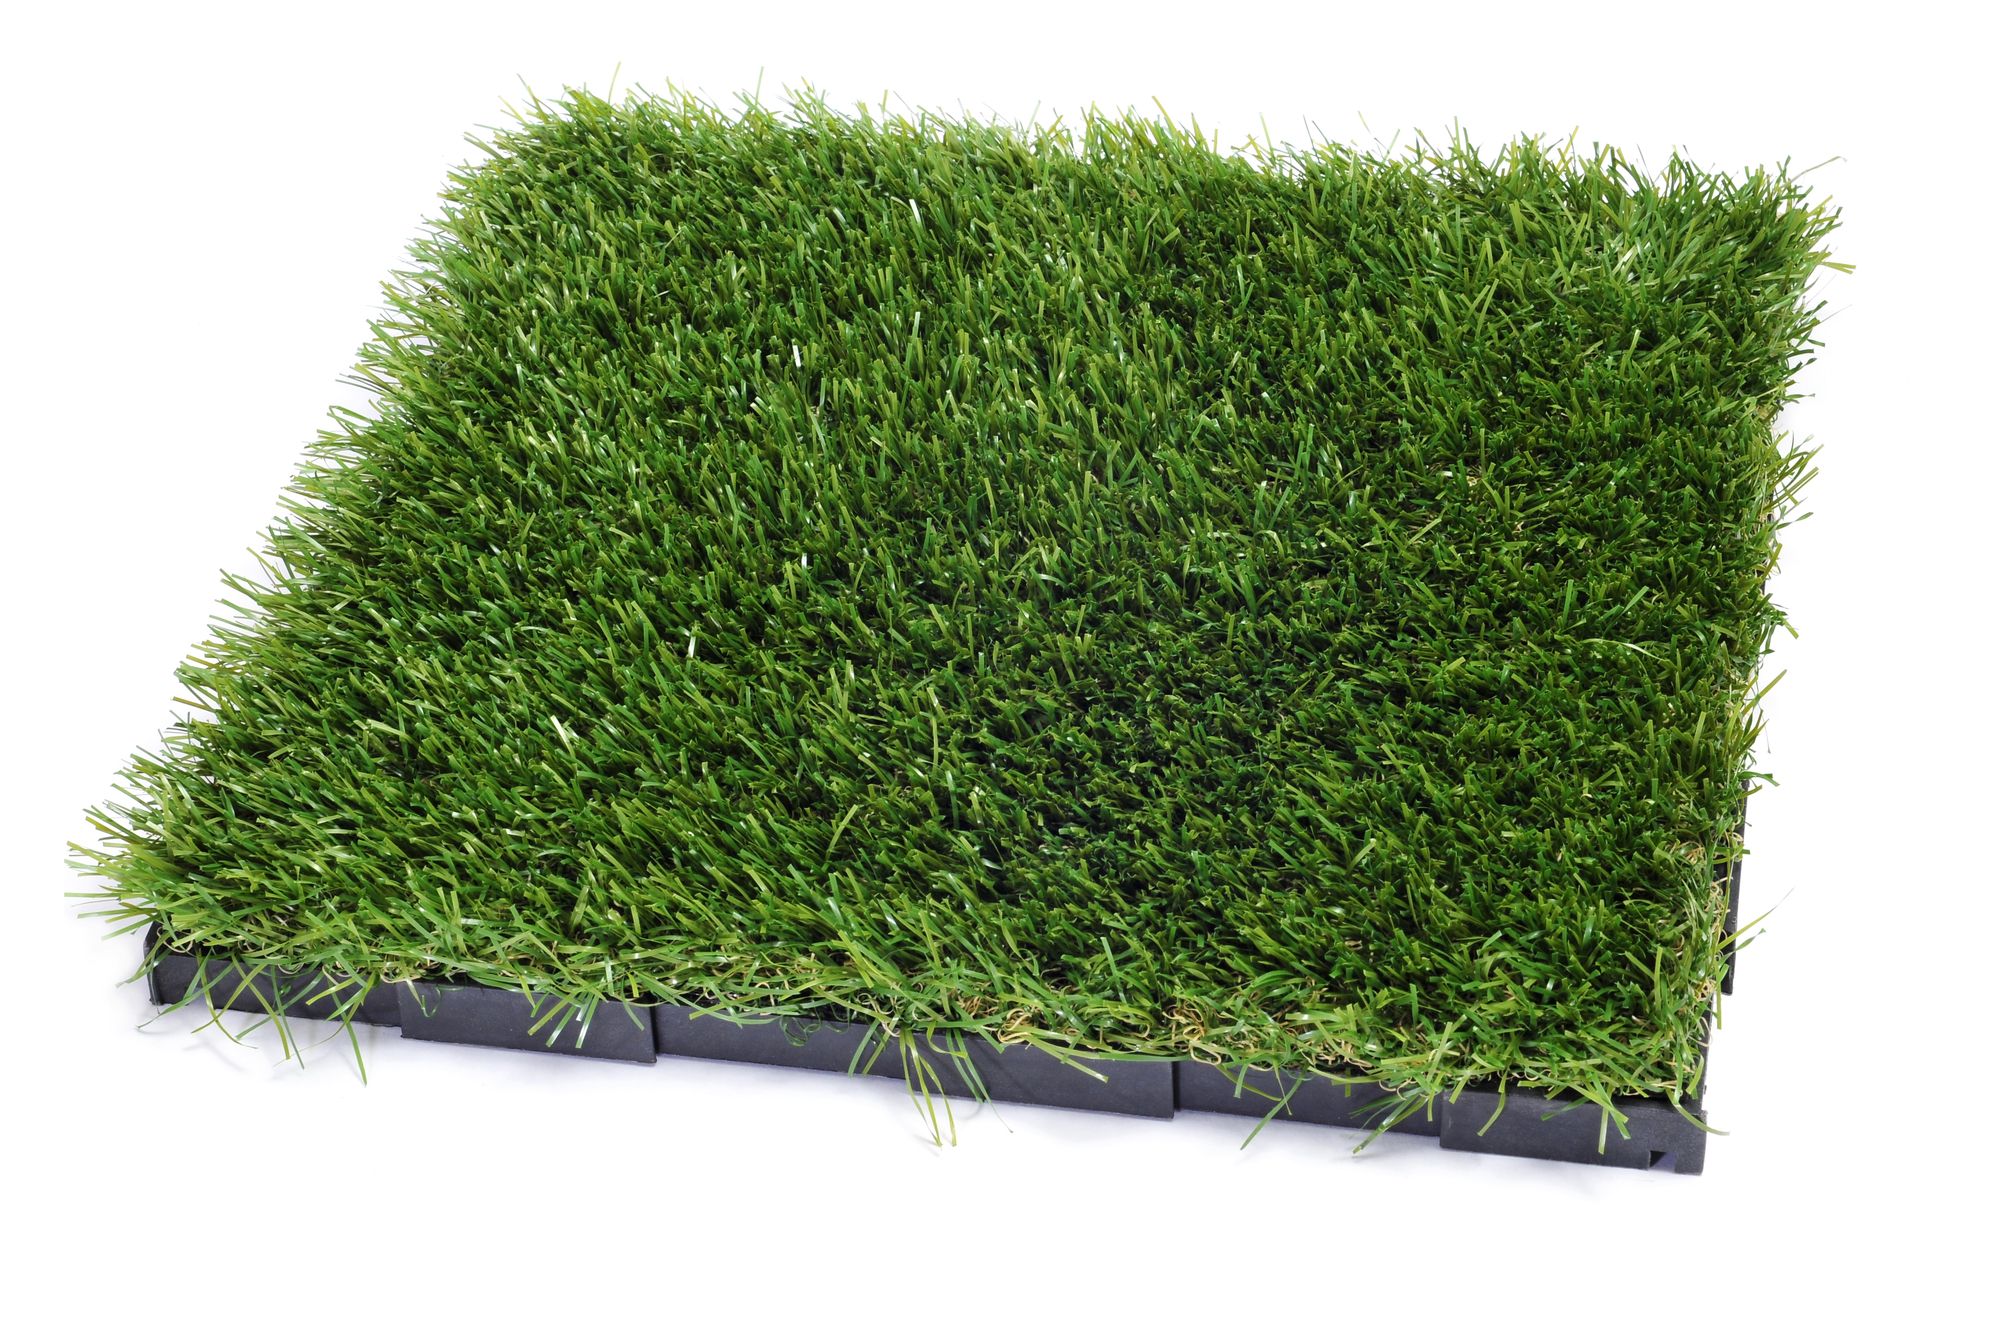 artificial turf tile on a white background